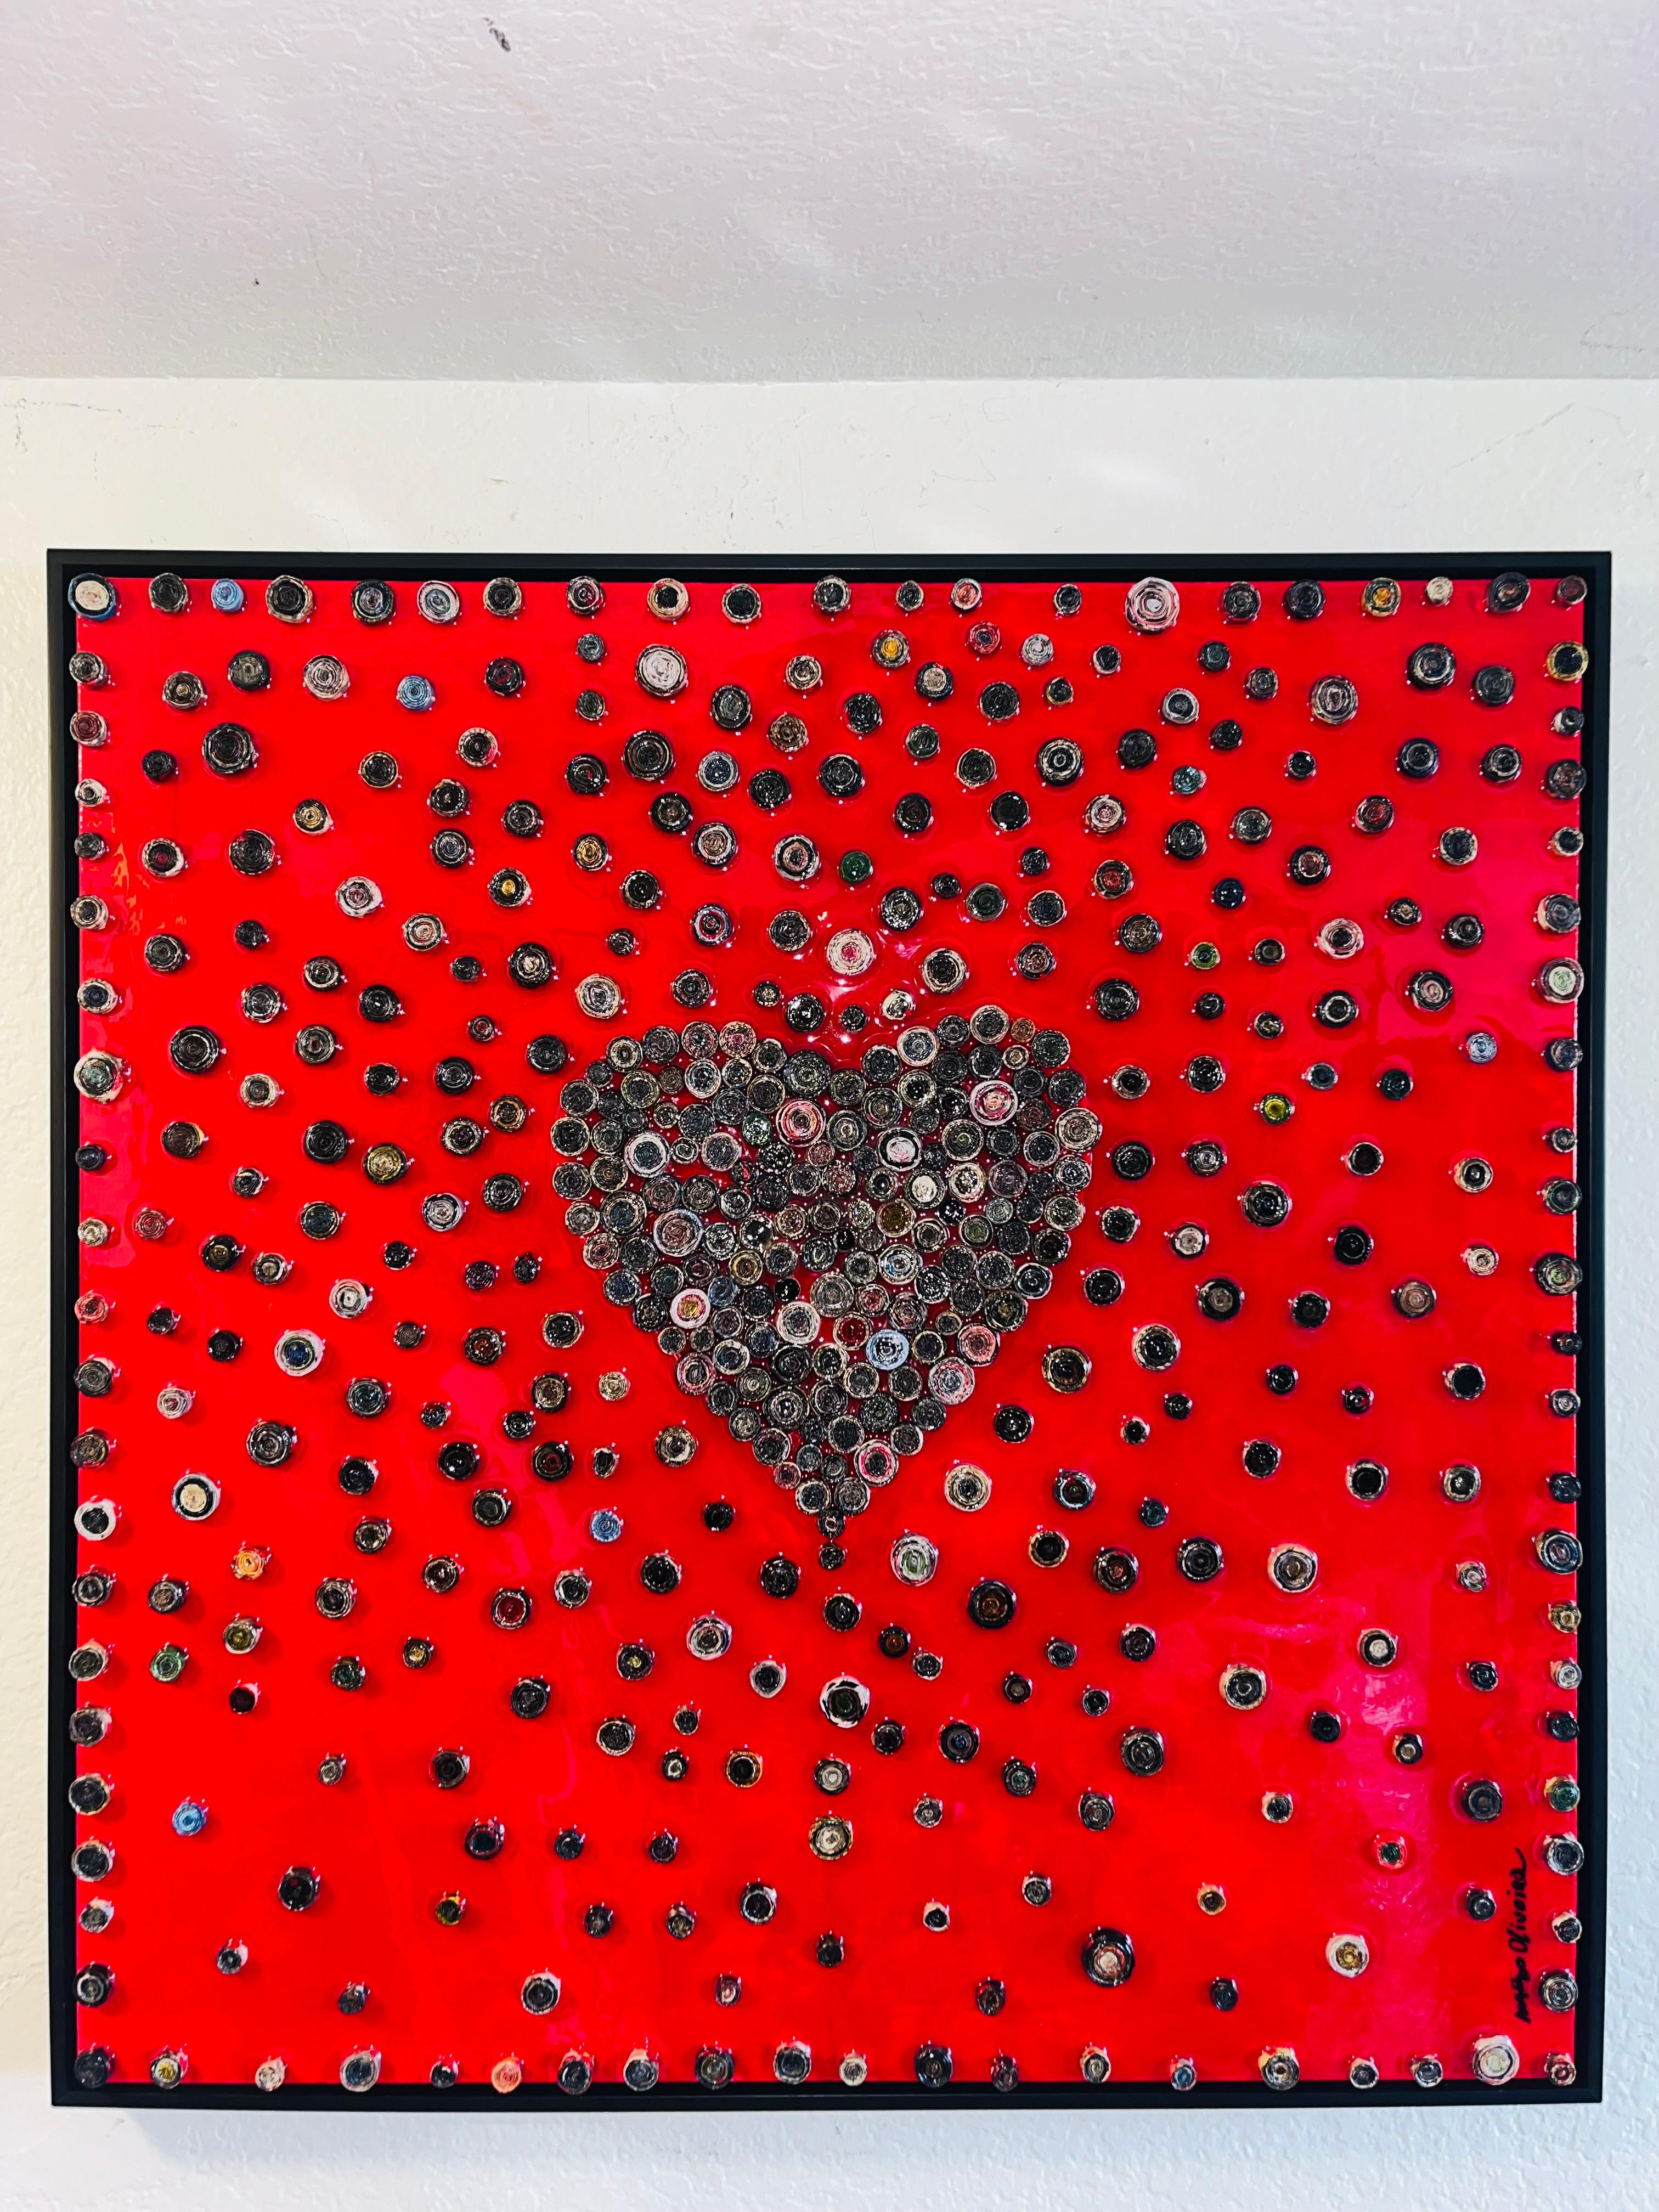 **ANNUAL SUPER SALE UNTIL JAN 31ST. ONLY**
**THIS PRICE WON'T BE REPEATED AGAIN THIS YEAR - TAKE ADVANTAGE OF IT**

SOLID LOVE is one of a kind mixed media framed artwork made with magazines pages rolled one by one. (weeks of work).

The heart shape